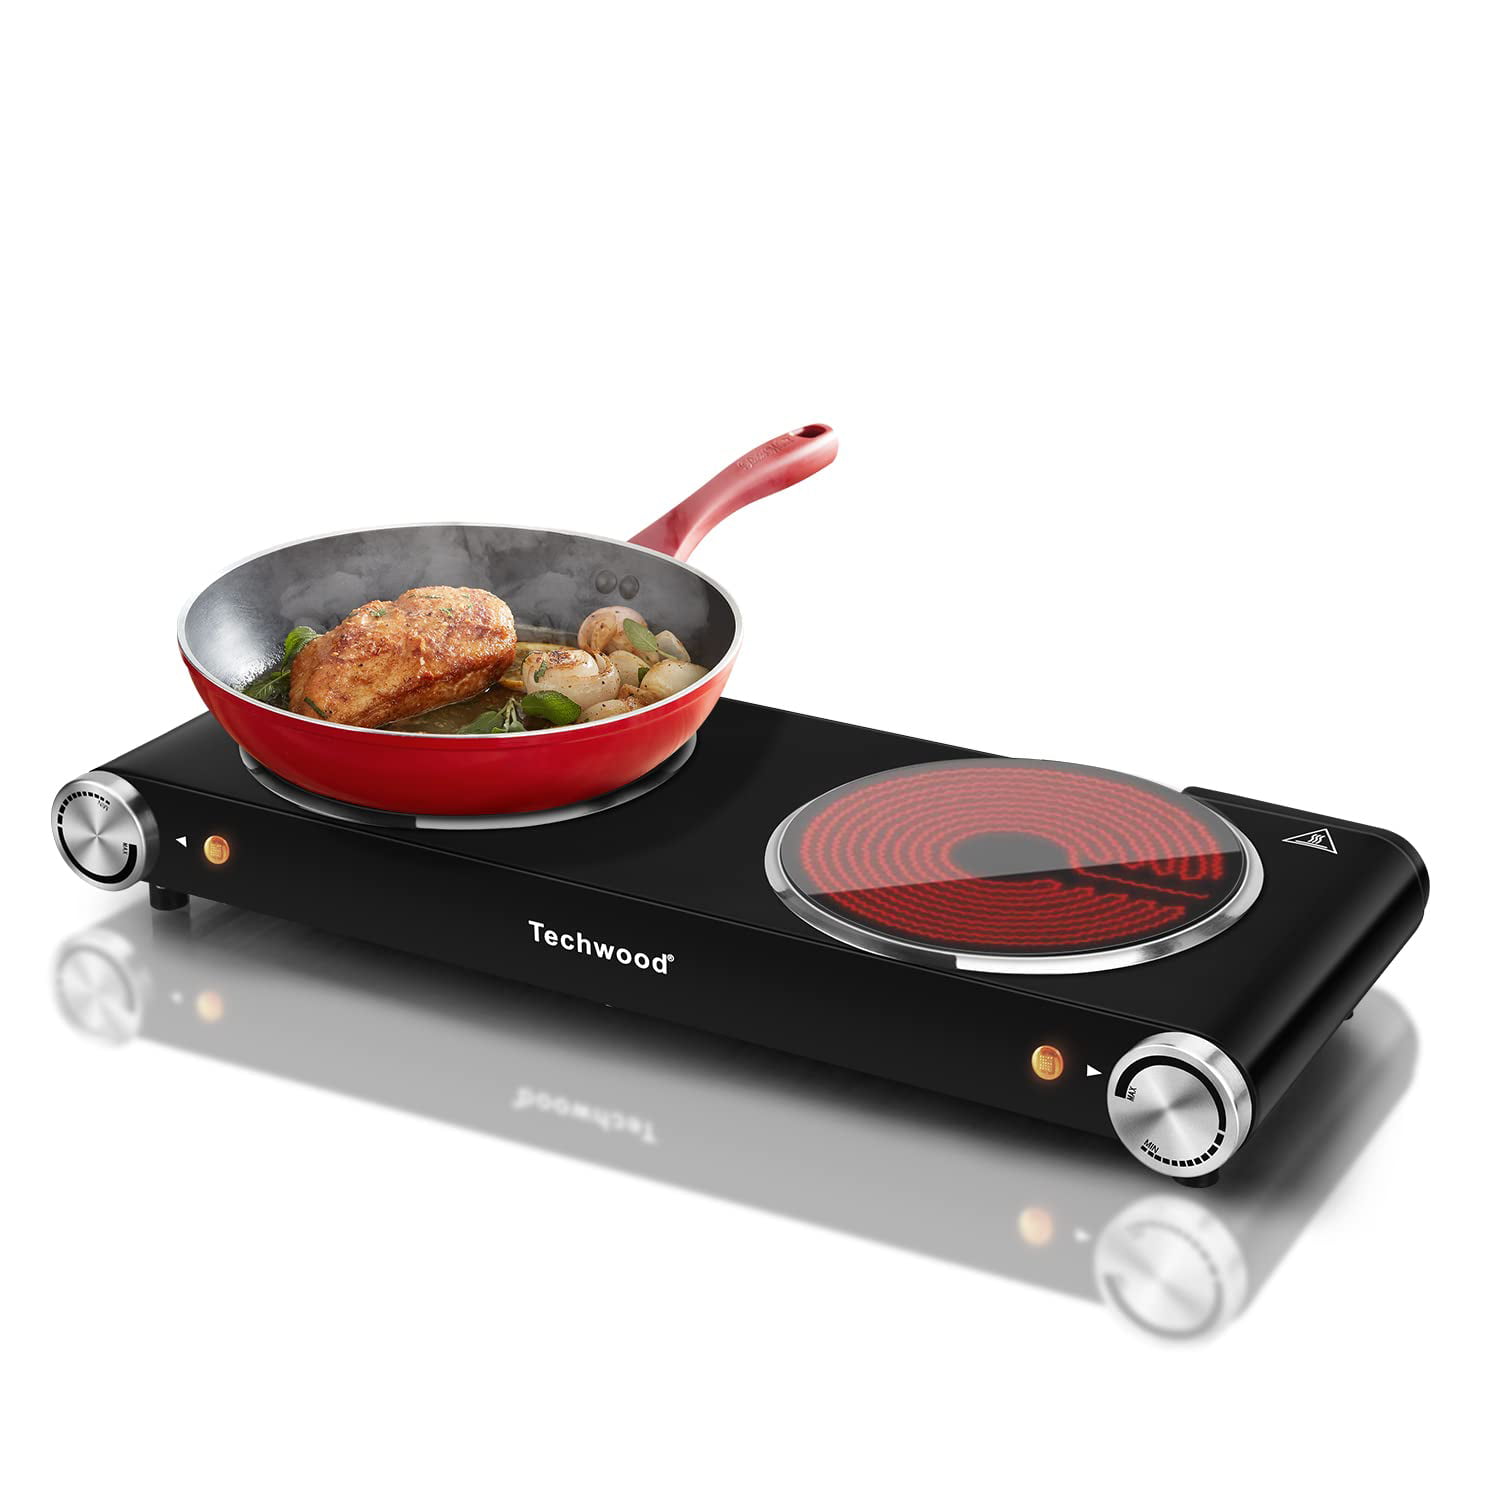 Techwood Hot Plate for Cooking, 1500W Electric Stove Countertop